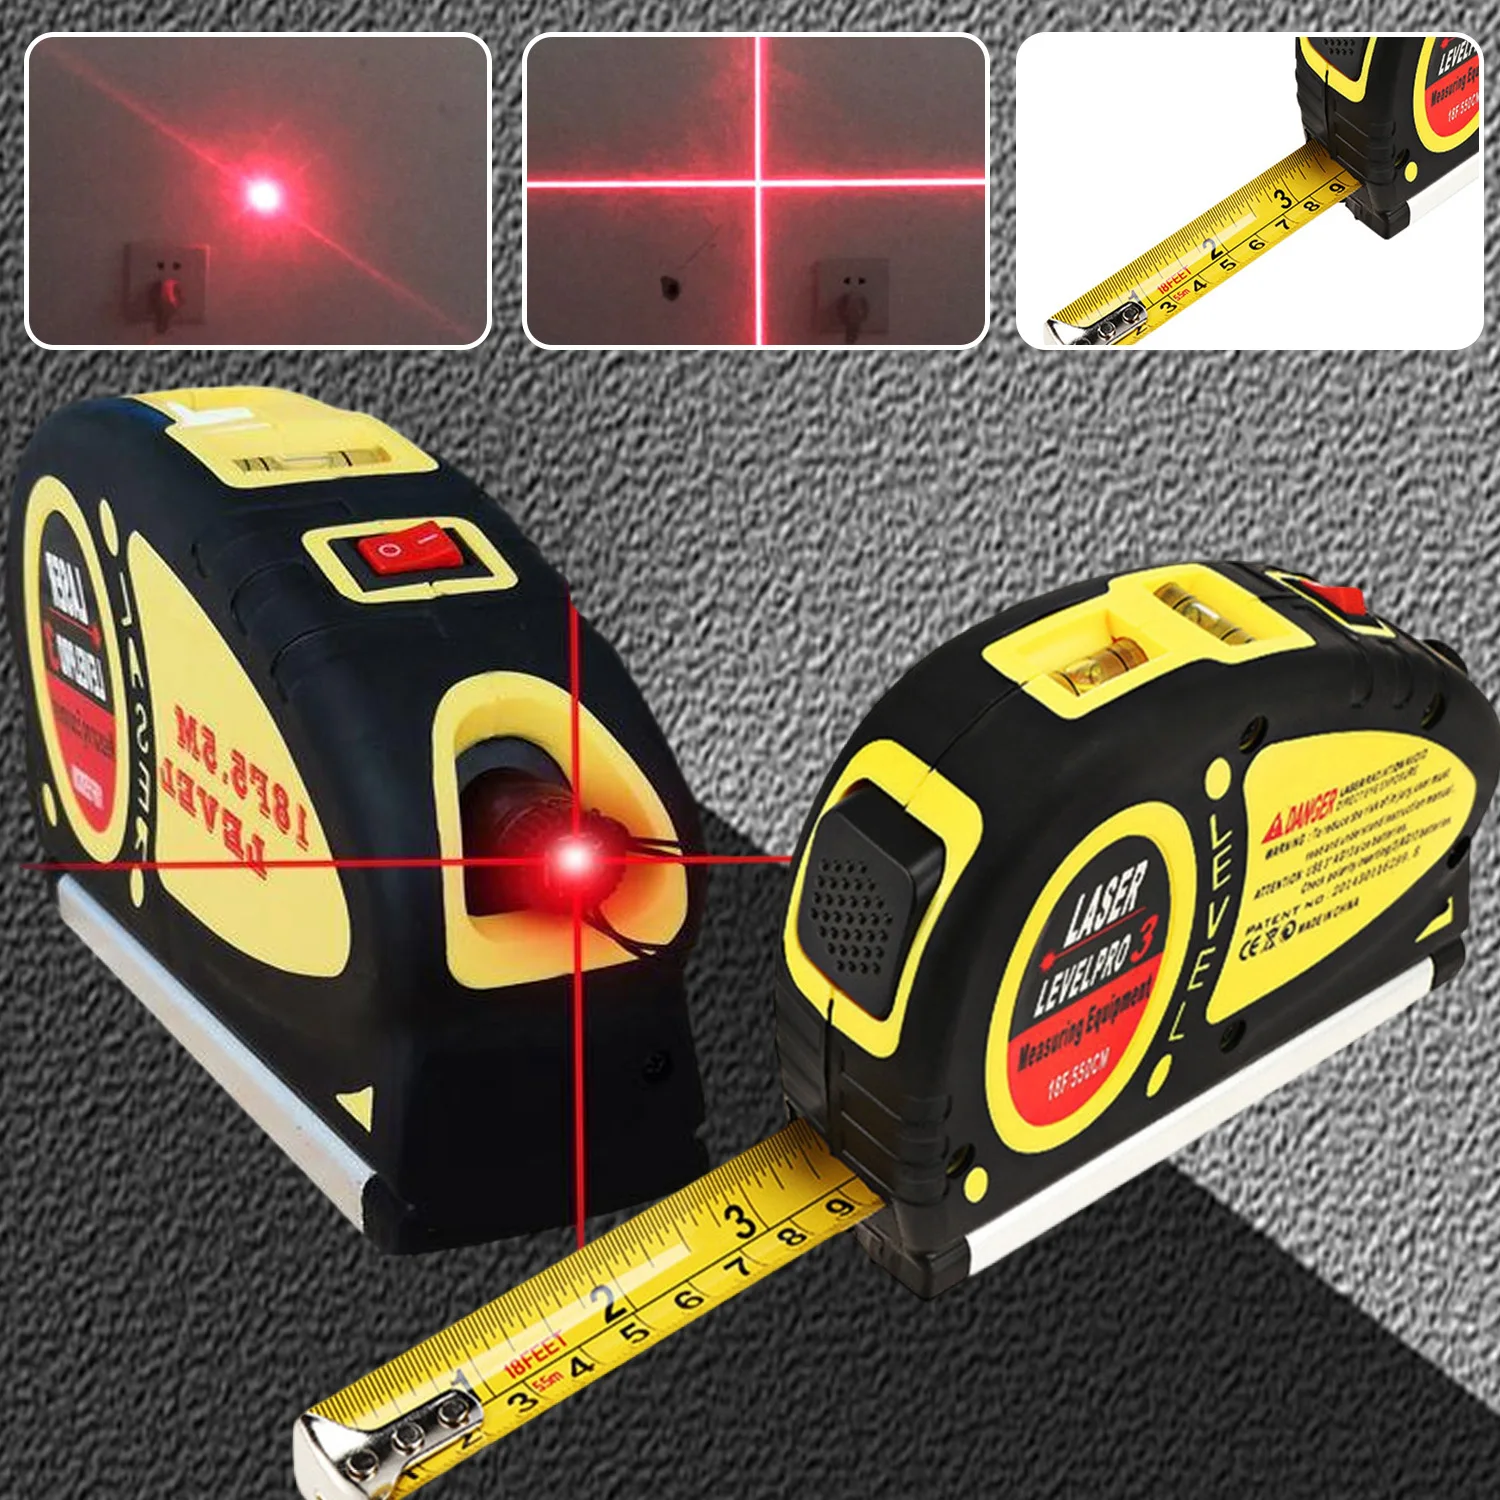 

18ft Steel Tape Measure 2 in 1 Laser Level,Powerful Beam Single Line Horizontal Crosshair Level Tools for Home Improvement